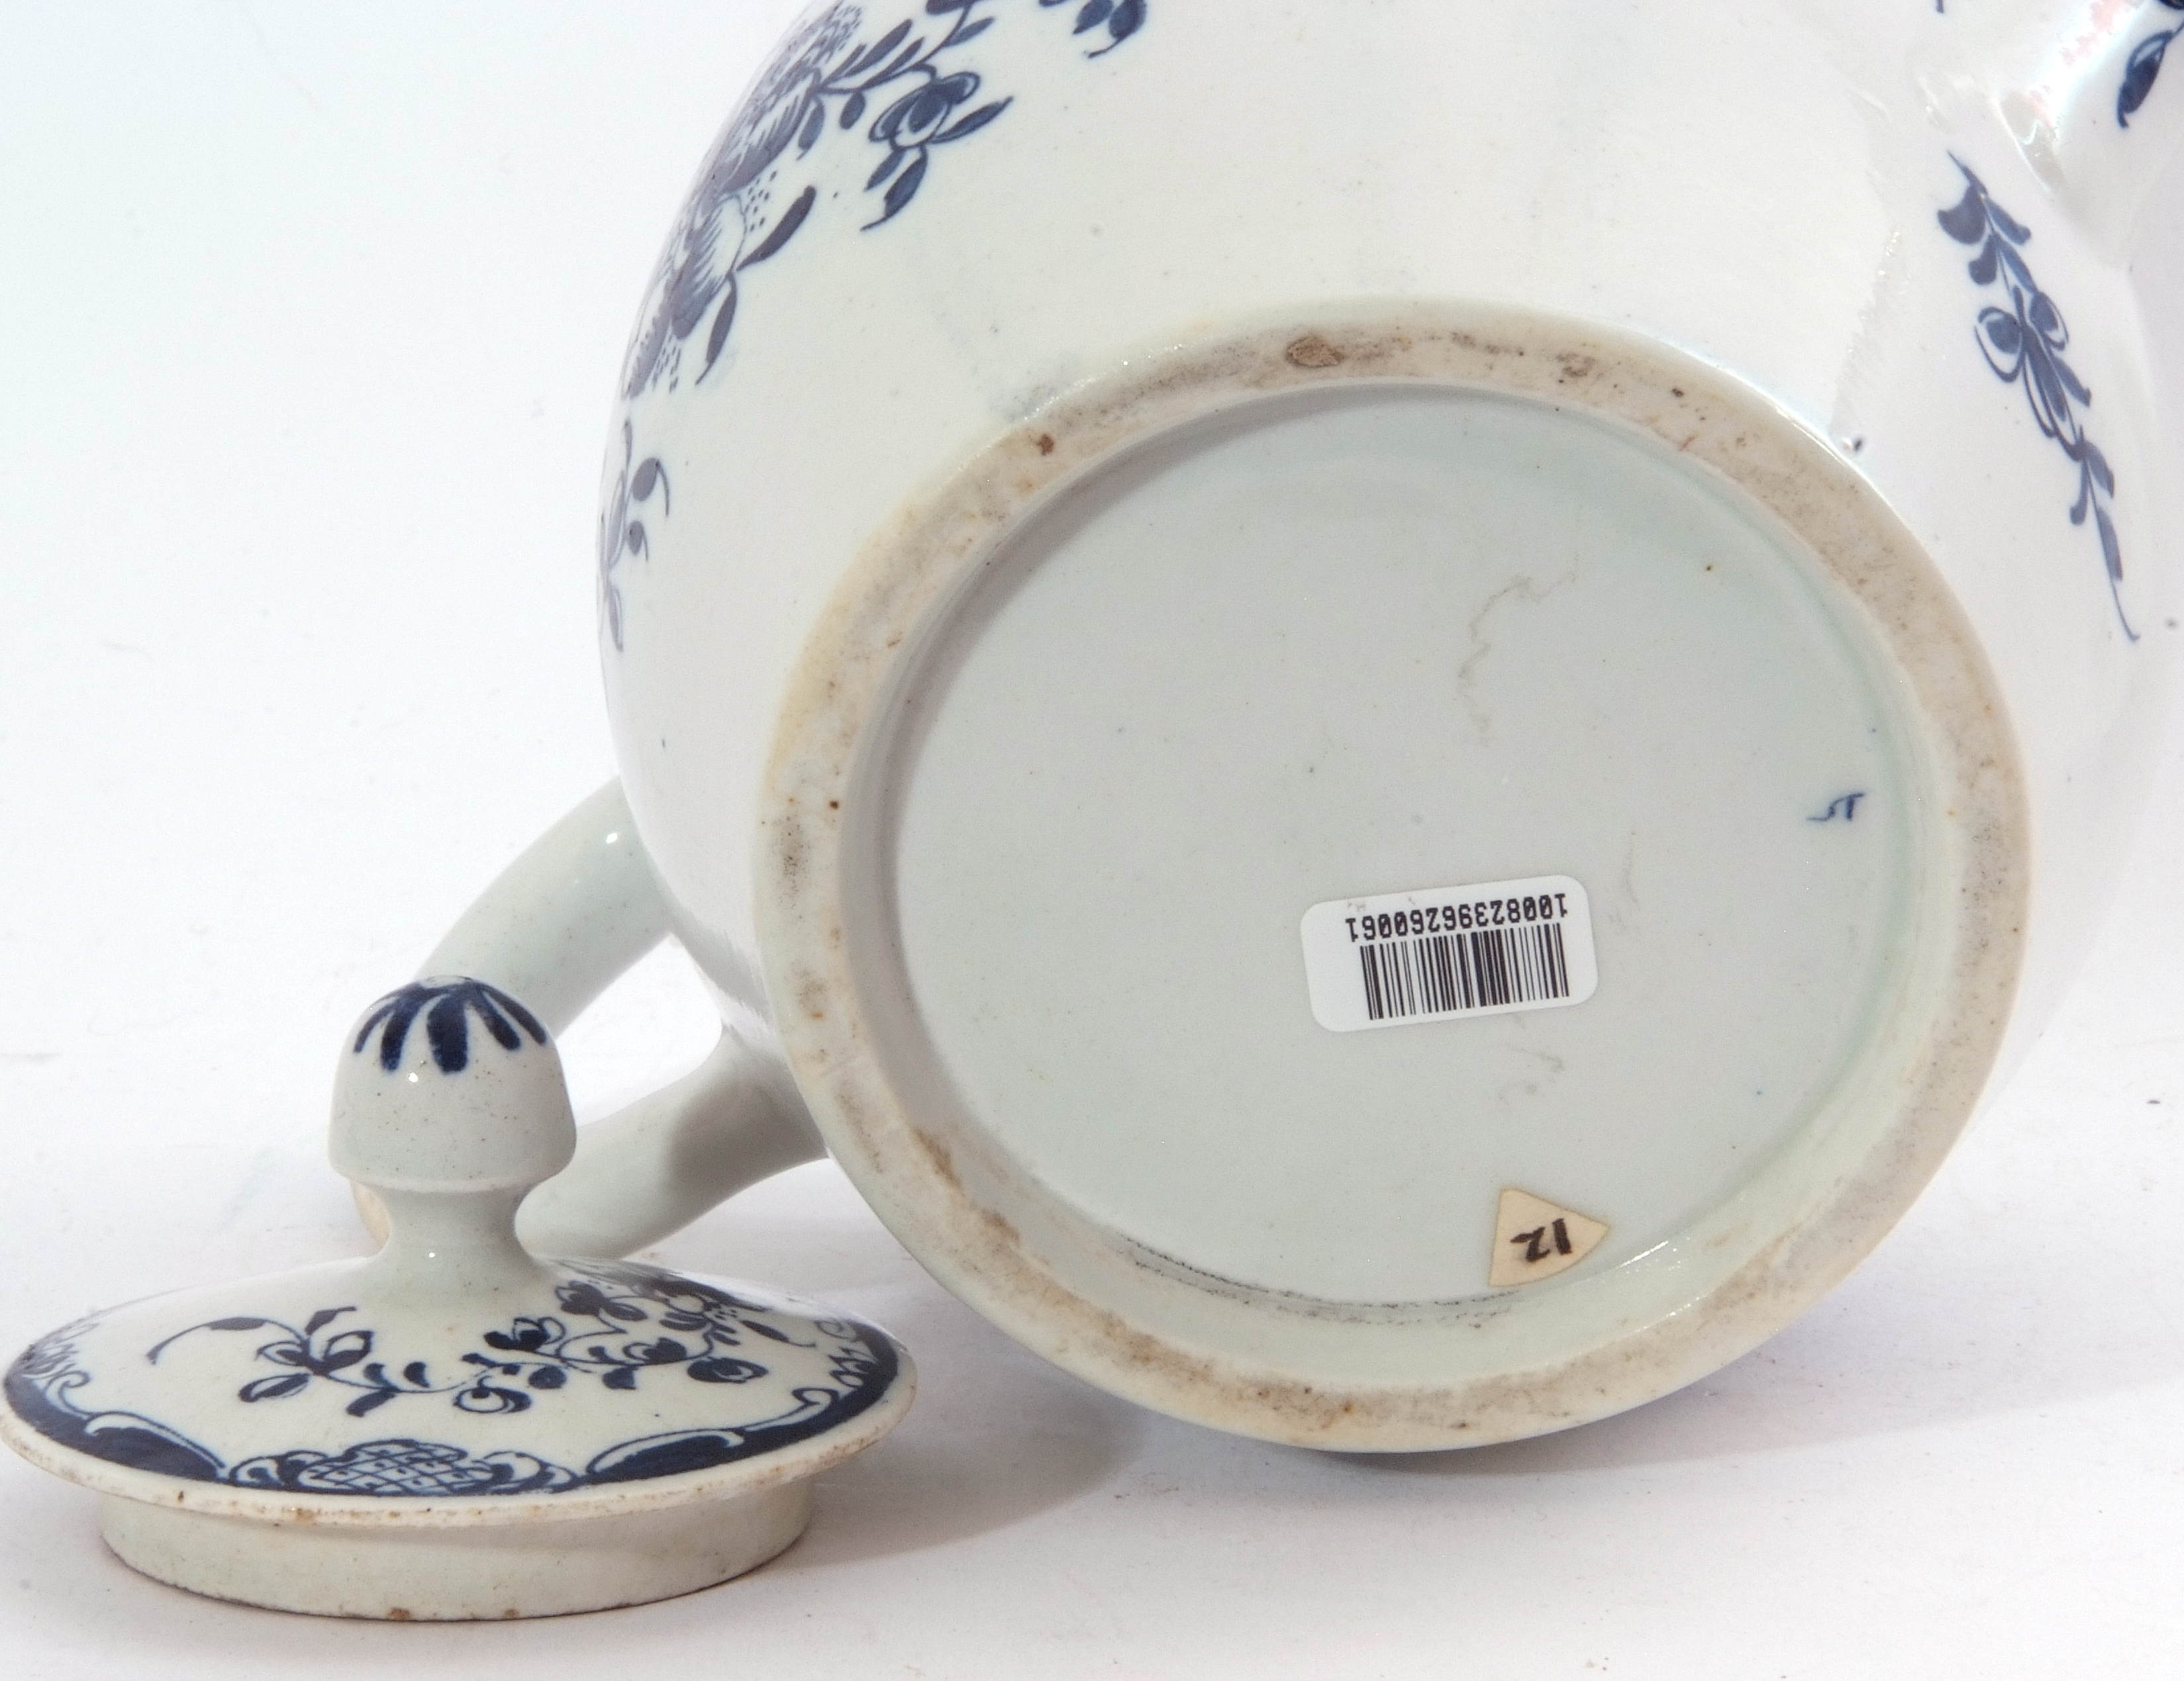 Unusual Lowestoft porcelain barrel shaped tea pot and cover, decorated with trailing flowers - Image 6 of 6